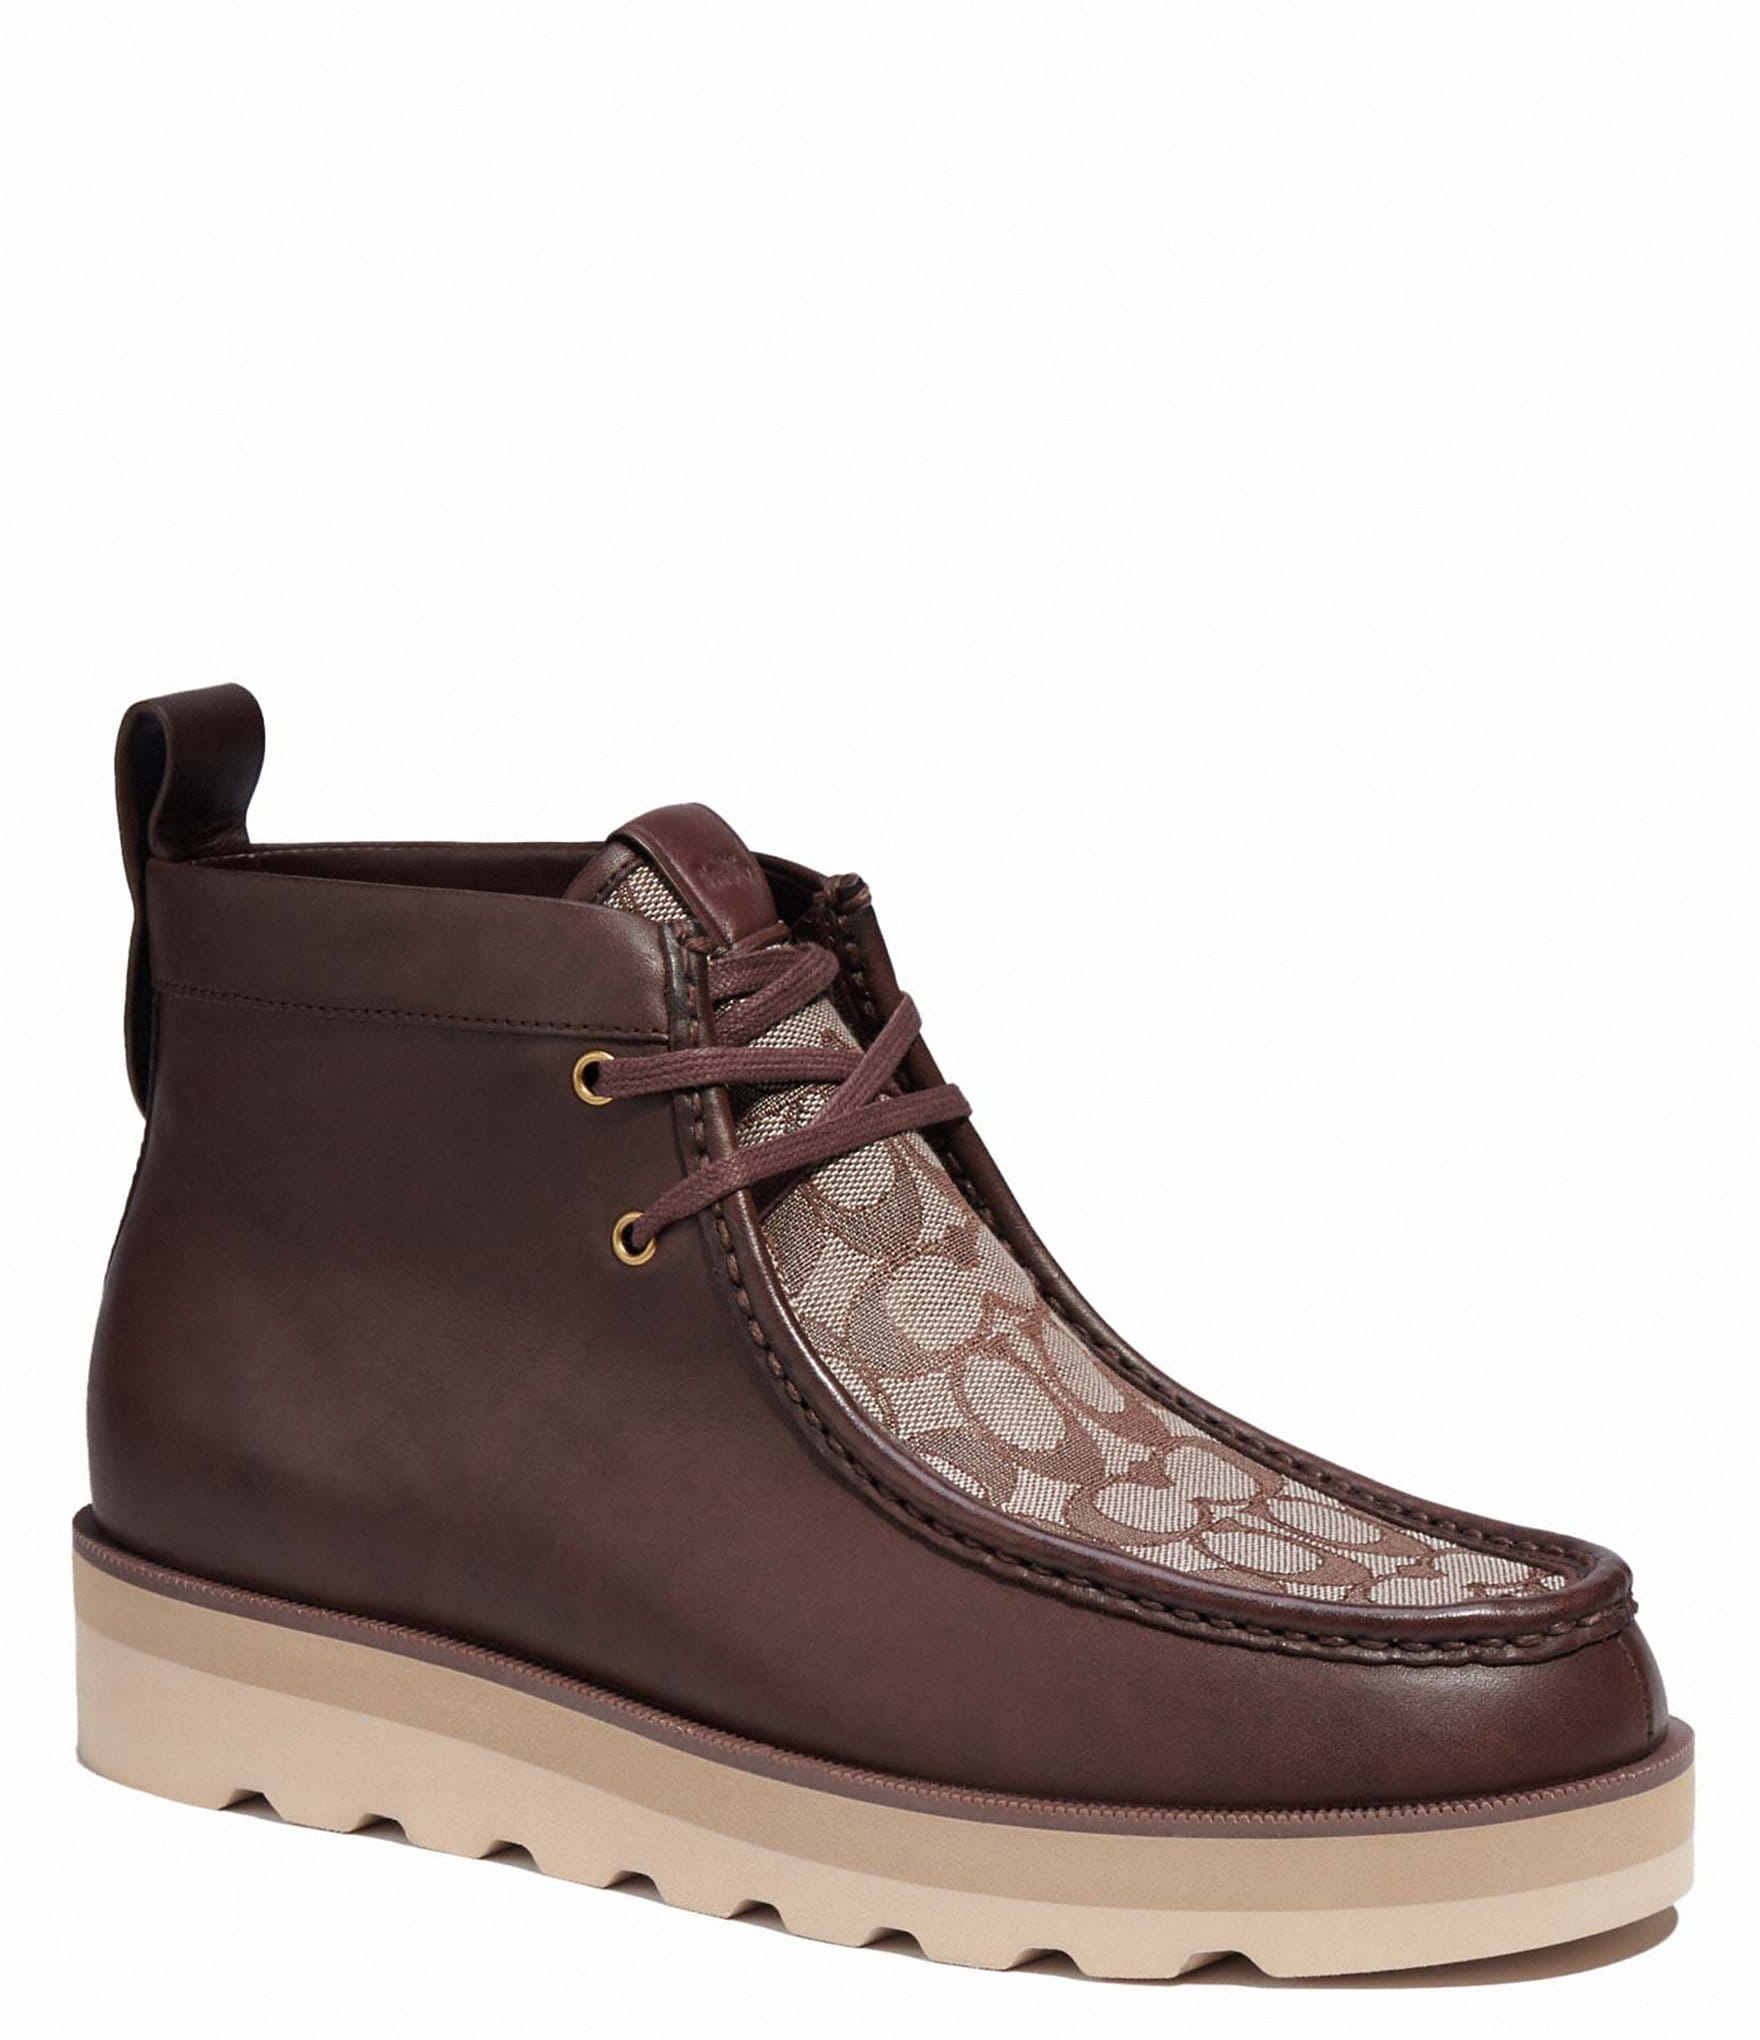 Cole Haan Men's 2.ZERØGRAND Leather Lace-Up Chukka Boots